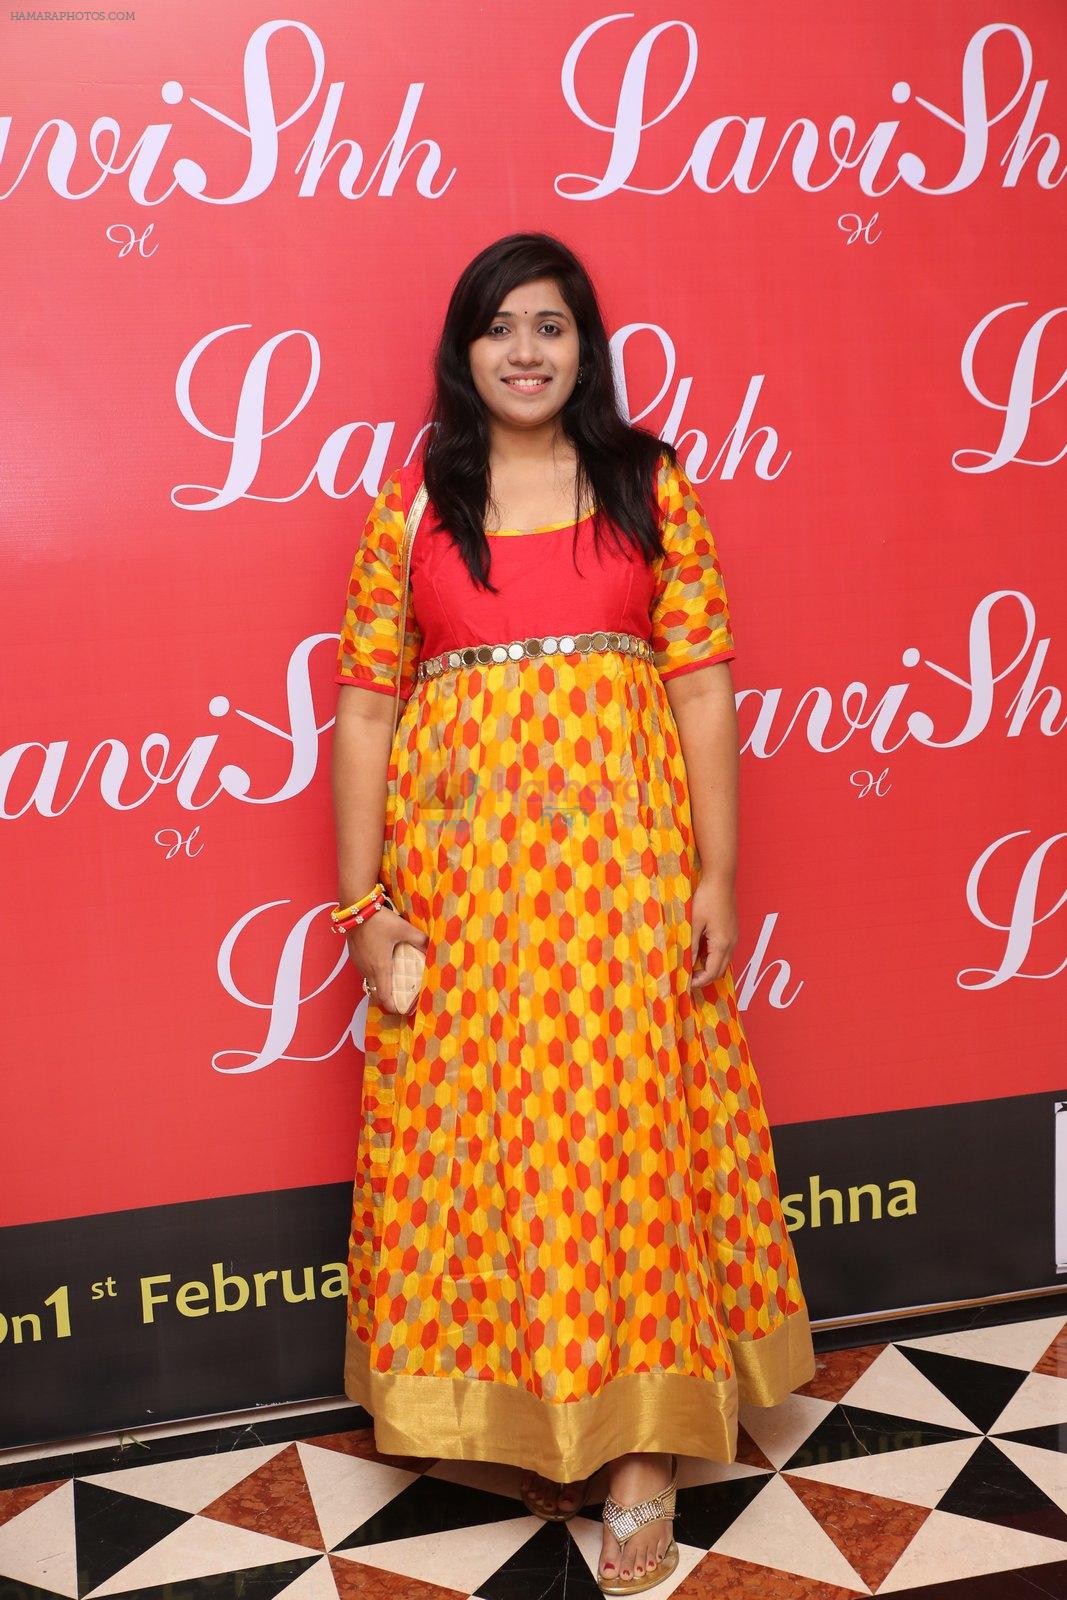 at Lavishh Expo in Hyderabad on 2nd Feb 2016